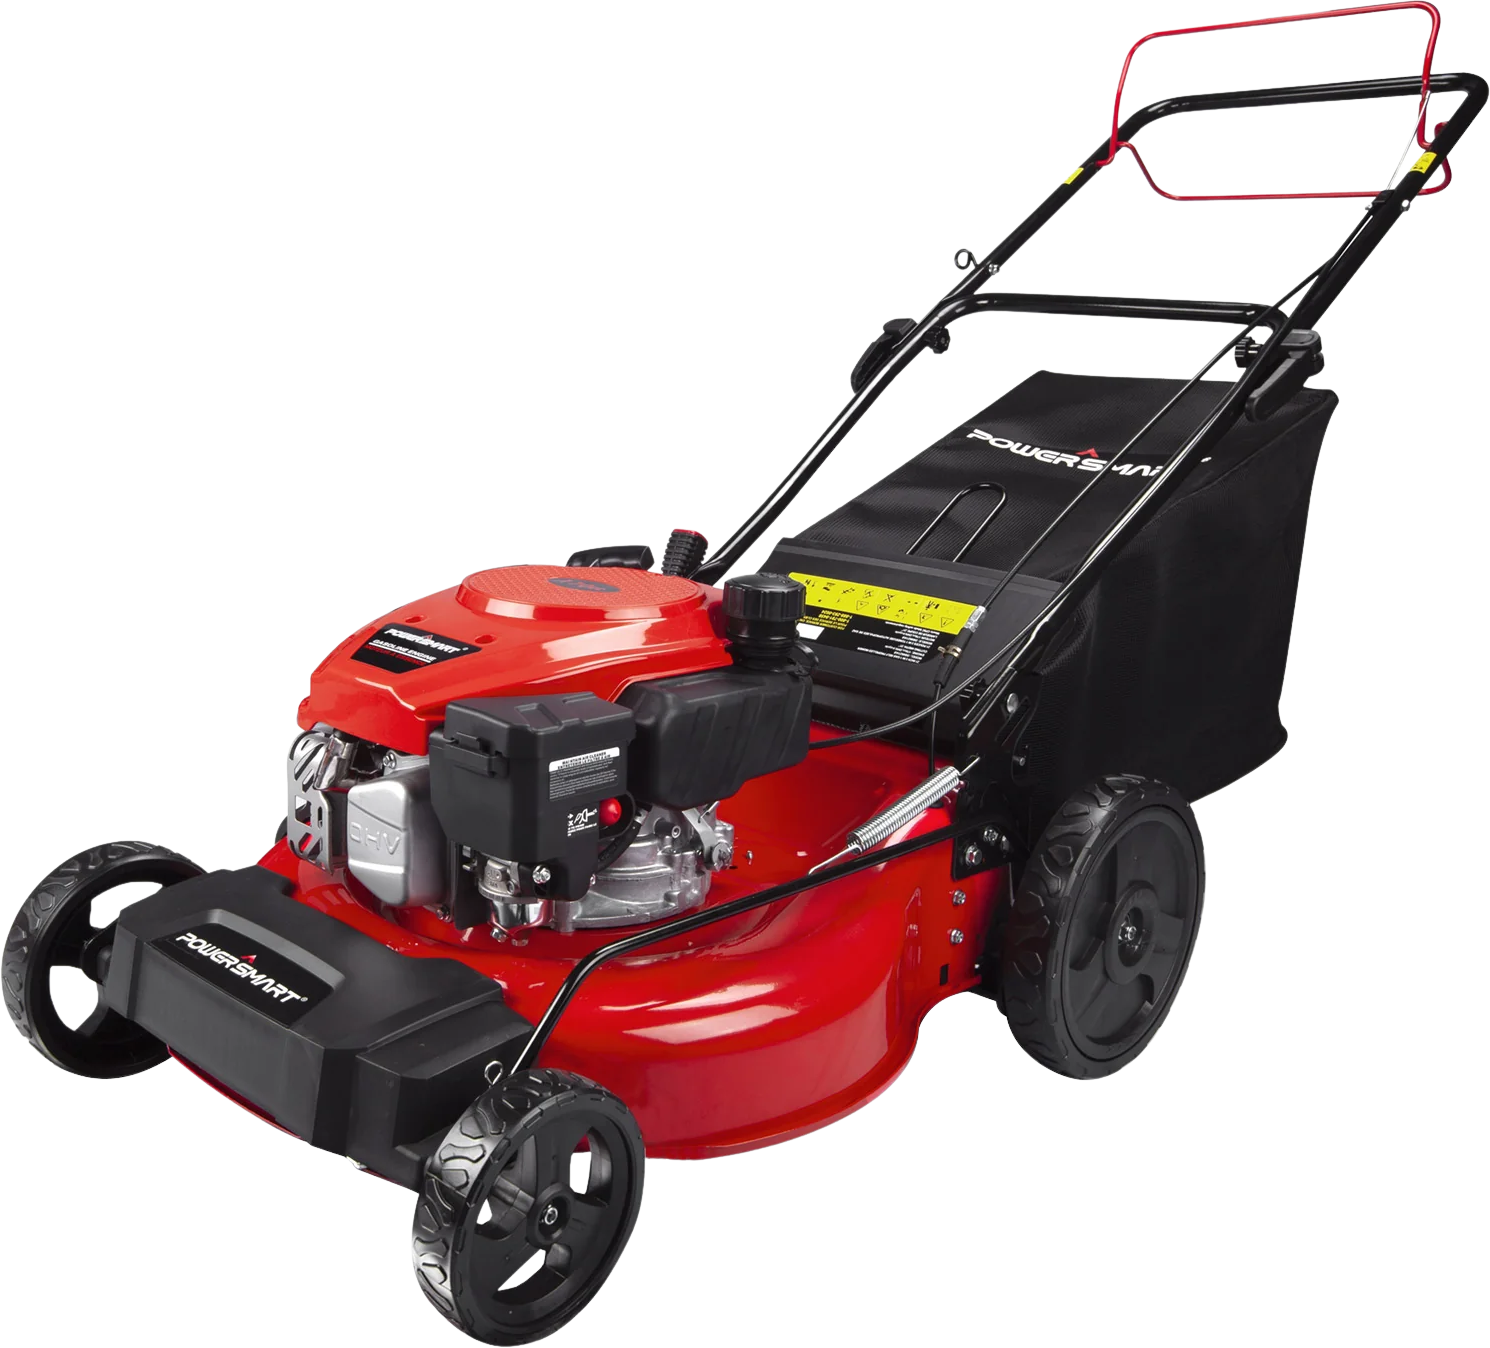 Powersmart, Powersmart DB8621AS 3-In-1 Lawn Mower 21" Self-Propelled 170cc Gas Engine Red New